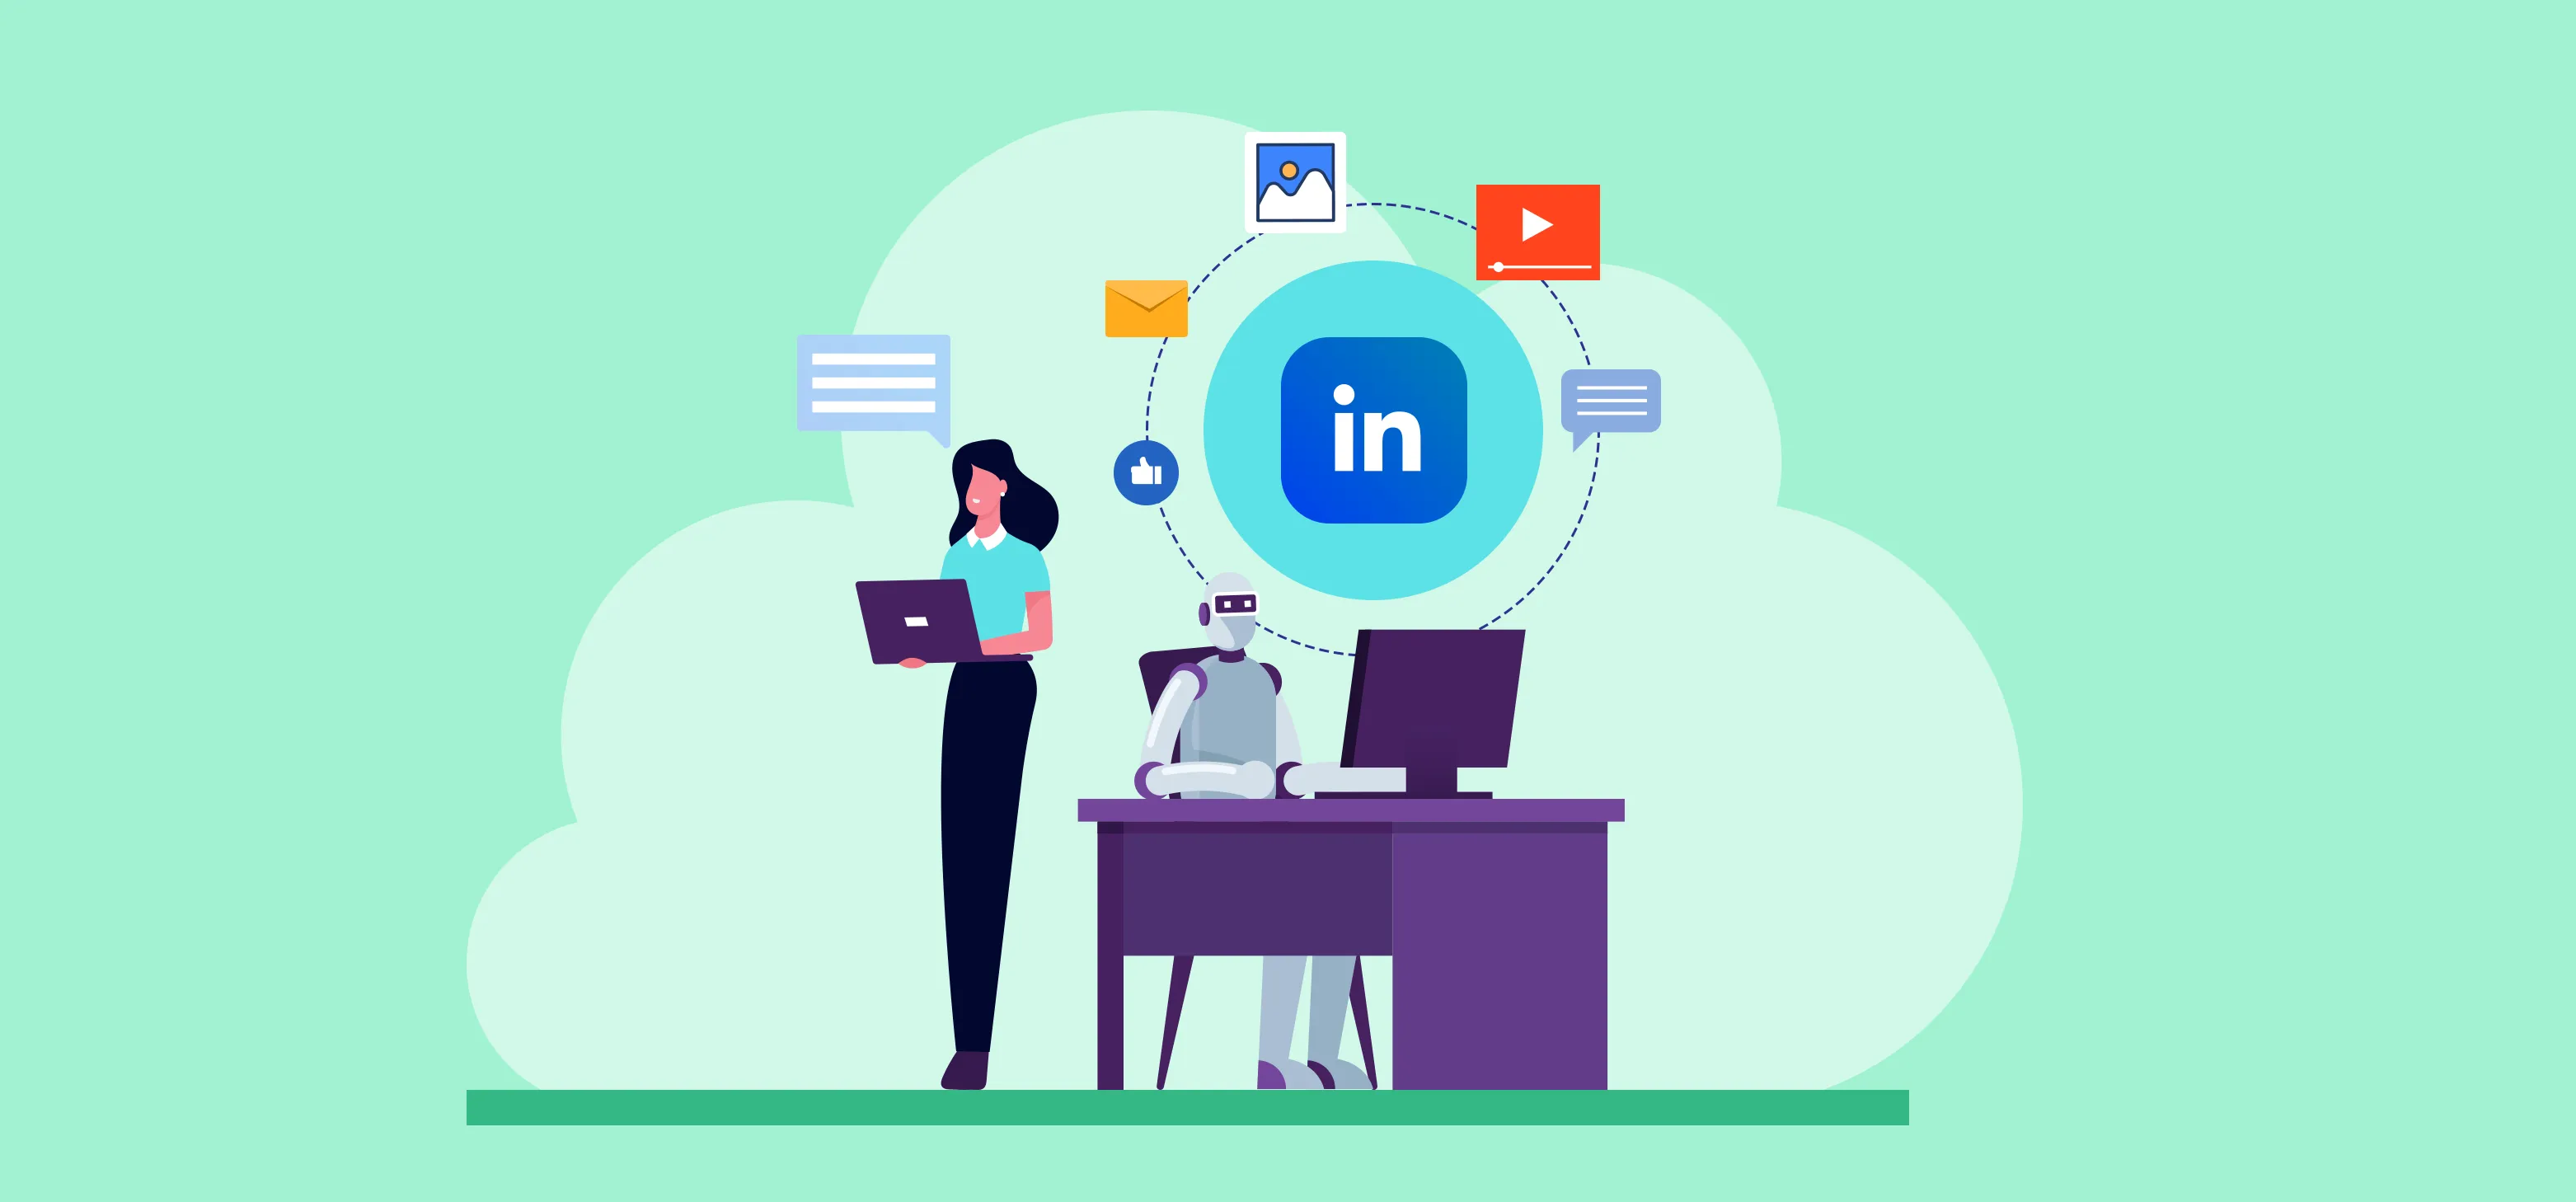 How To Make Your Product Stand Out With LinkedIn link in 2021